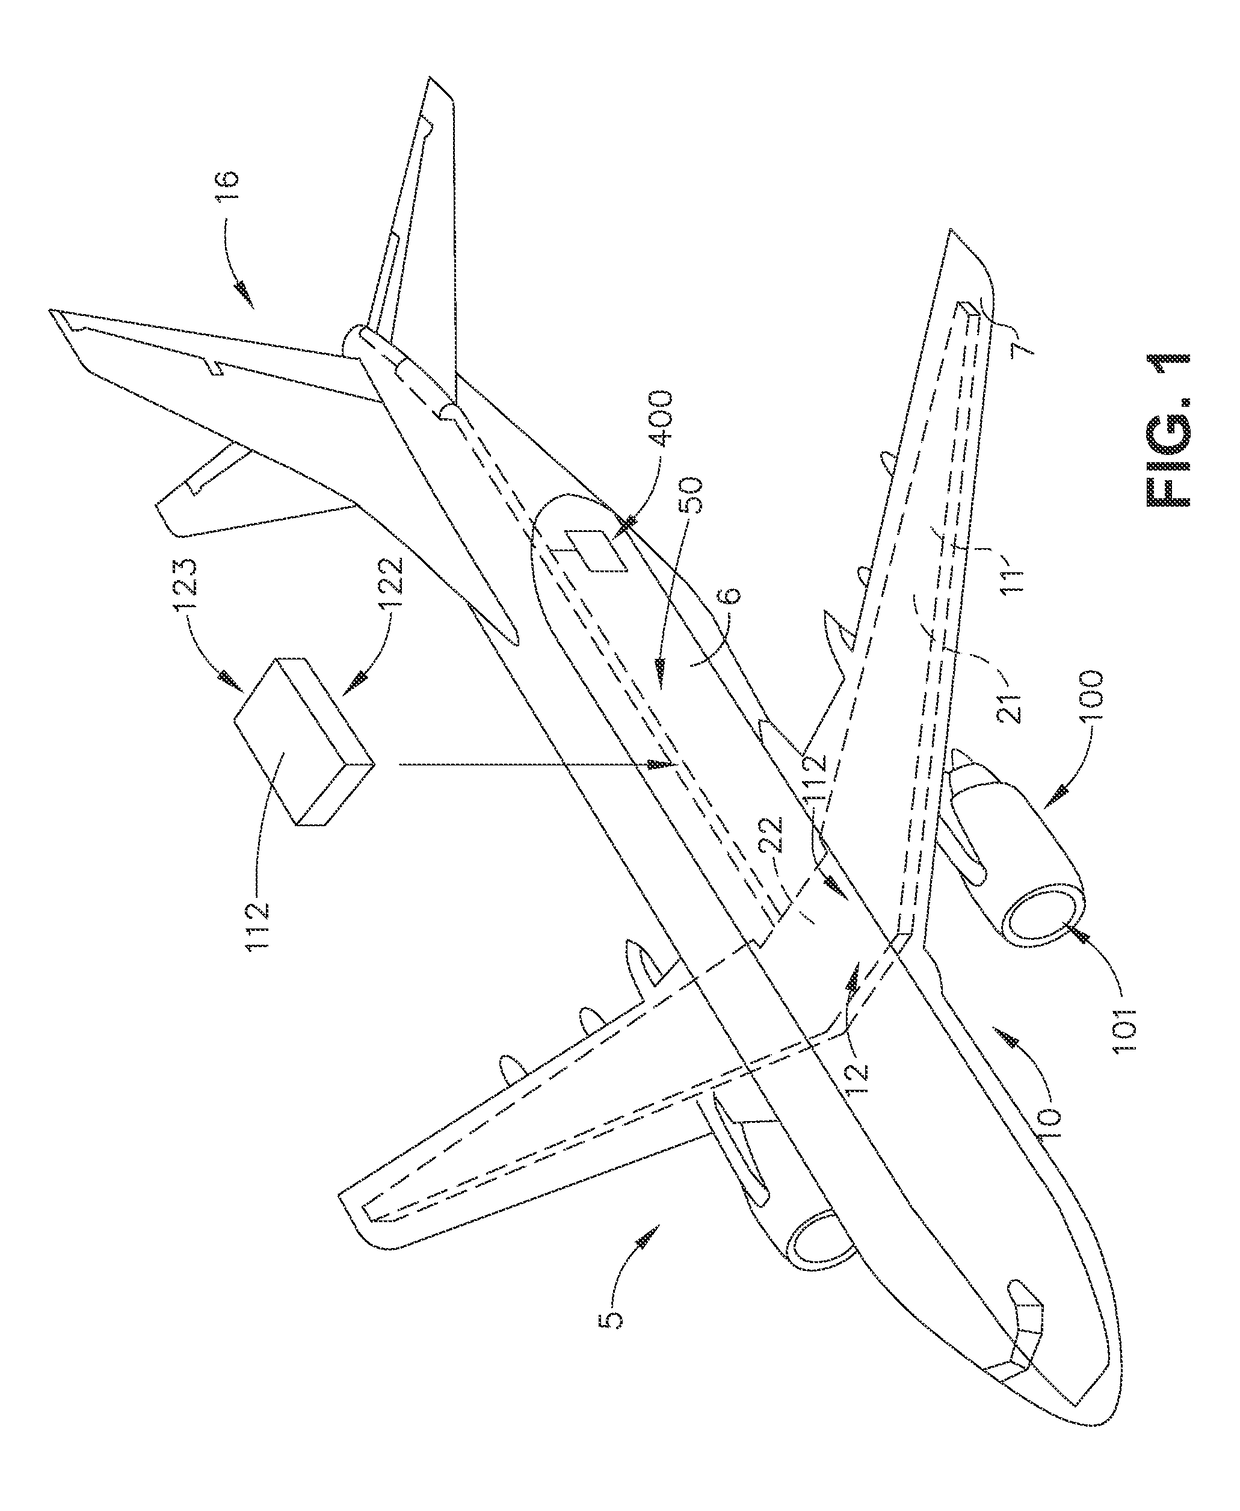 Cryogenic fuel system and method for delivering fuel in an aircraft